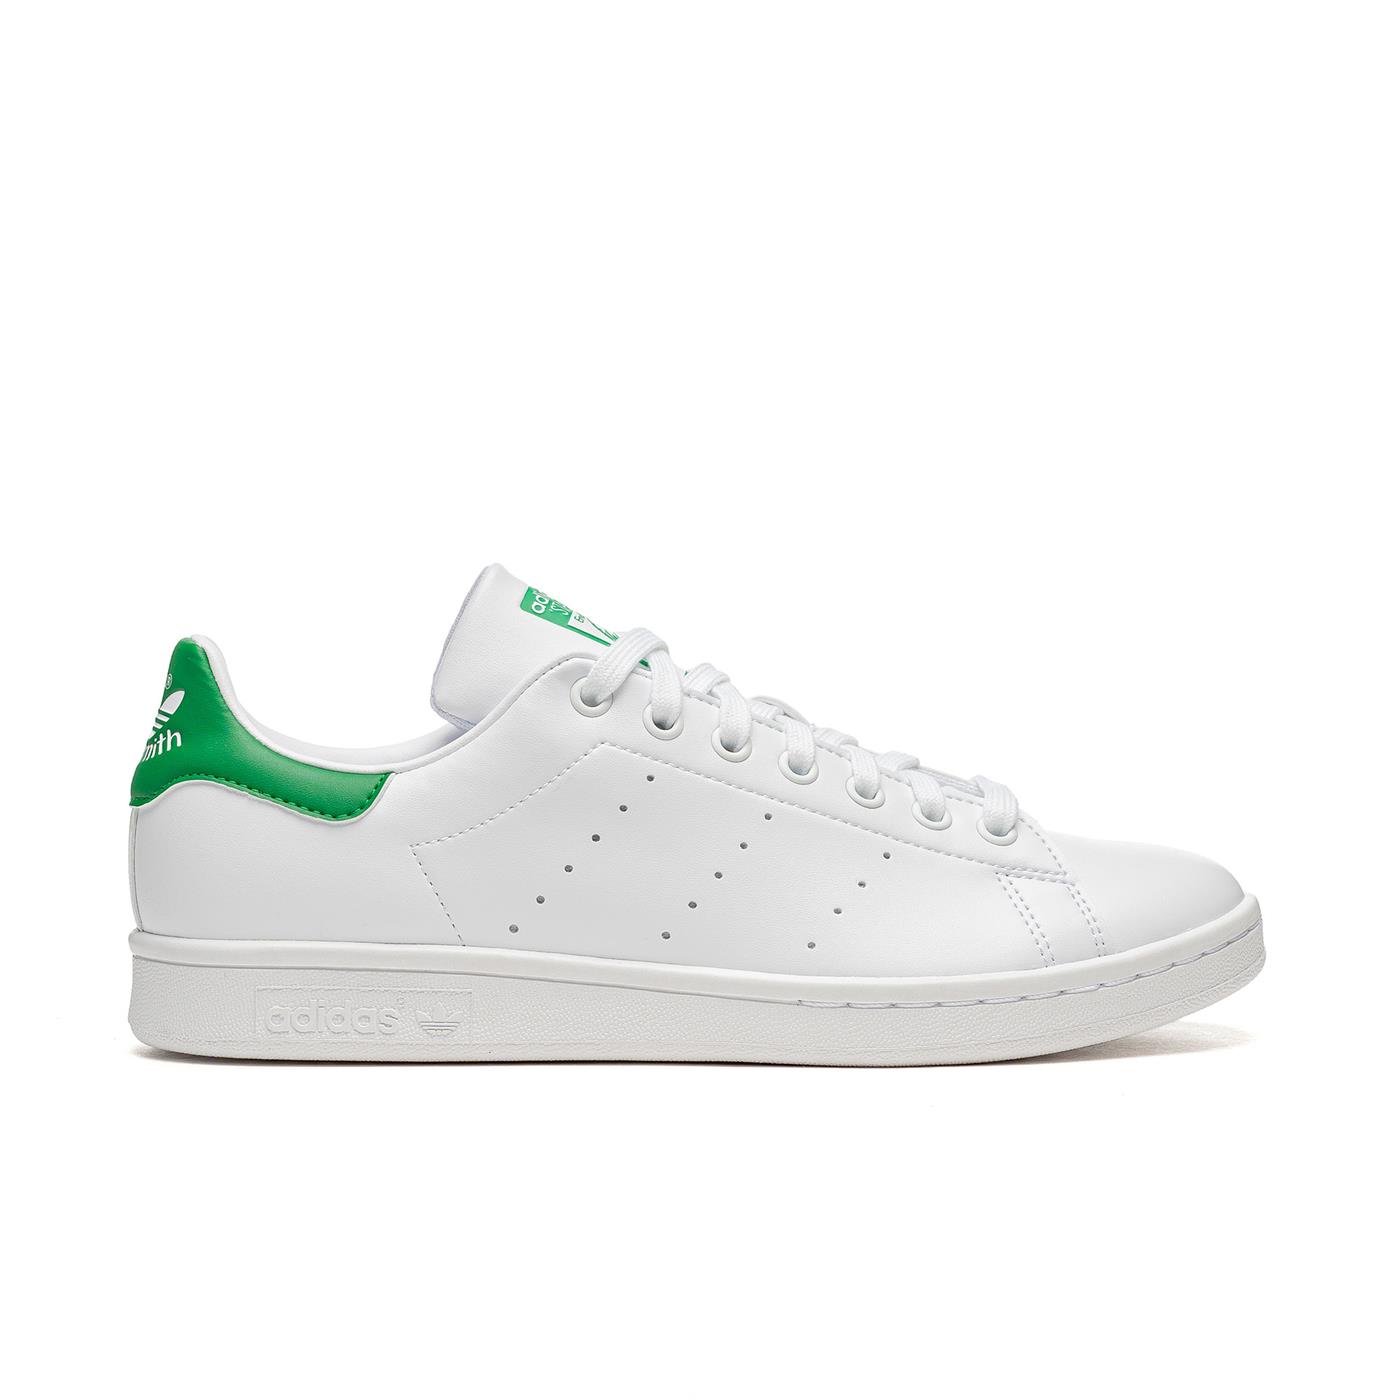 Sneakers ADIDAS Stan Smith for Man | adidas x16+ purechaos junior for women black | ArvindShops